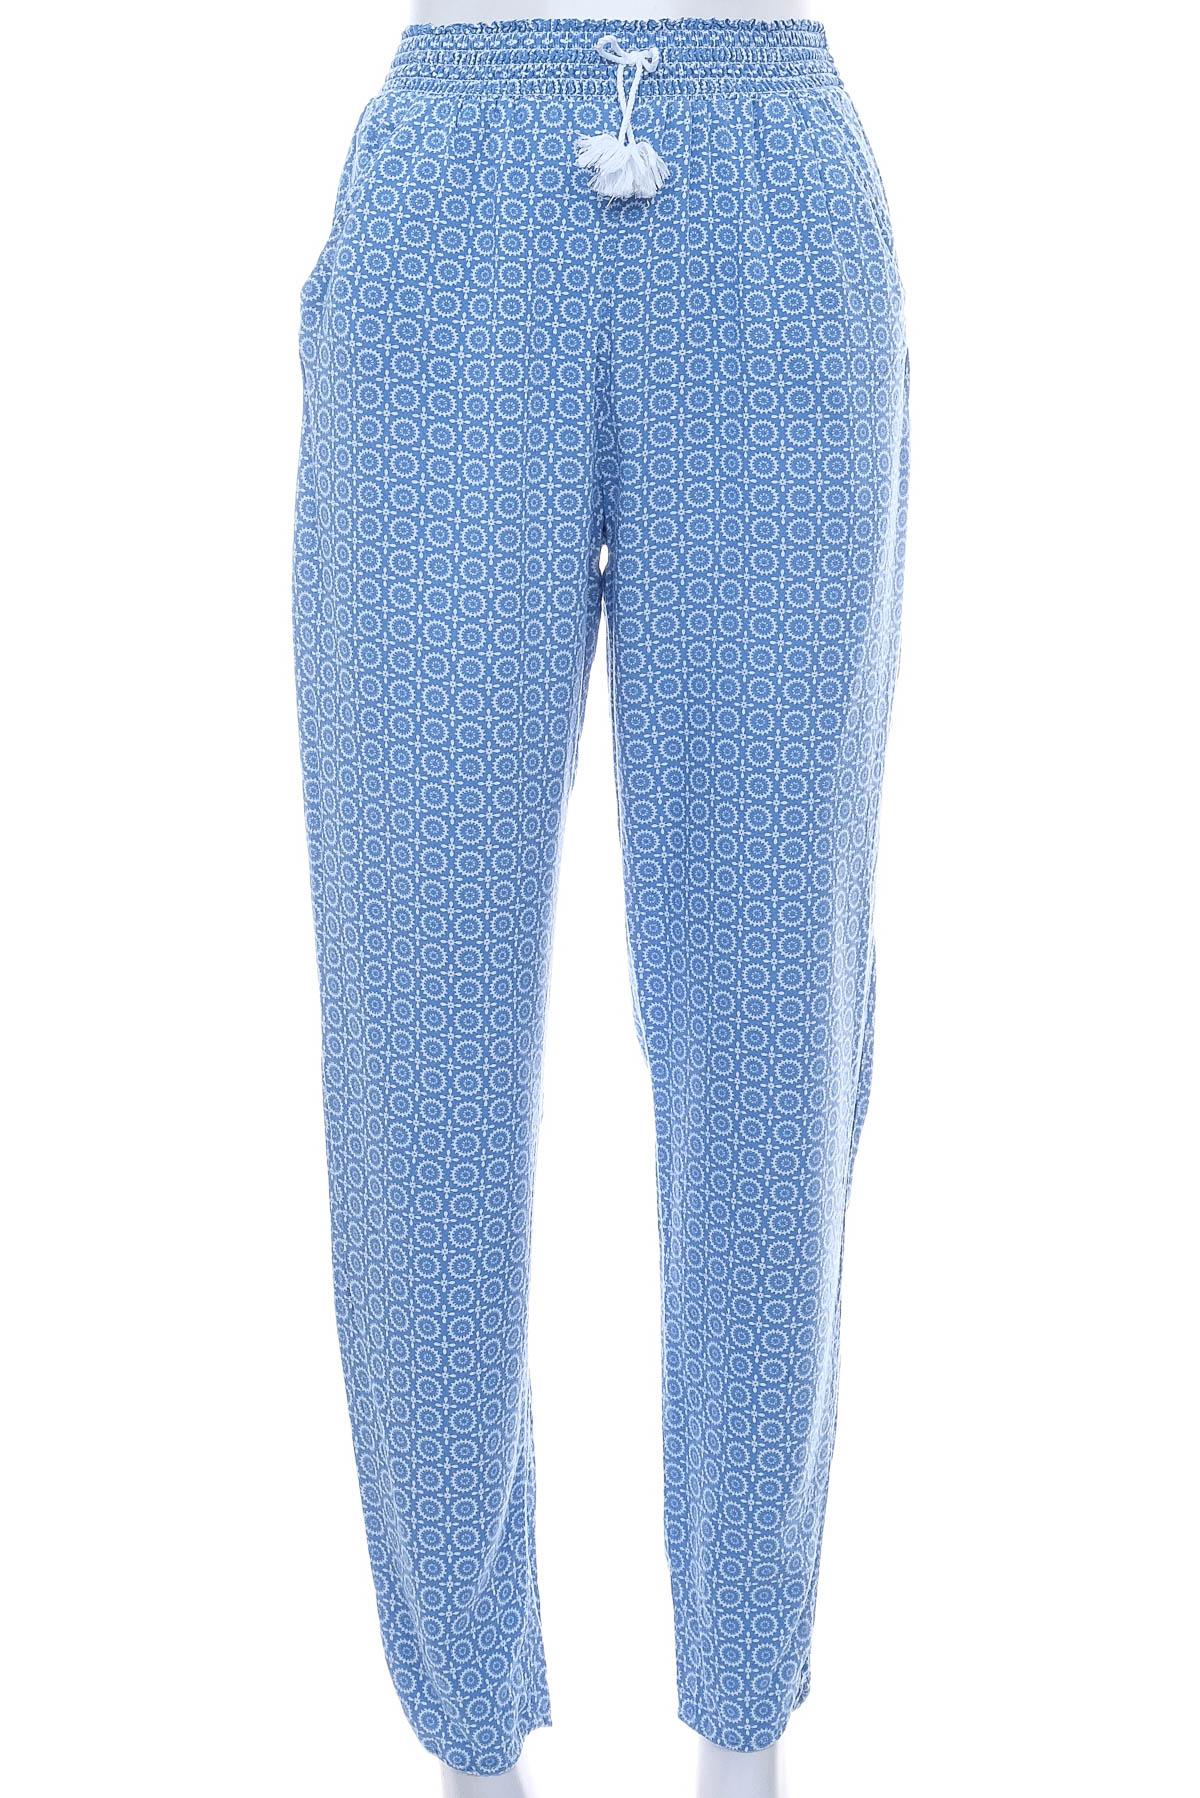 Trousers for girl - H&M - 0